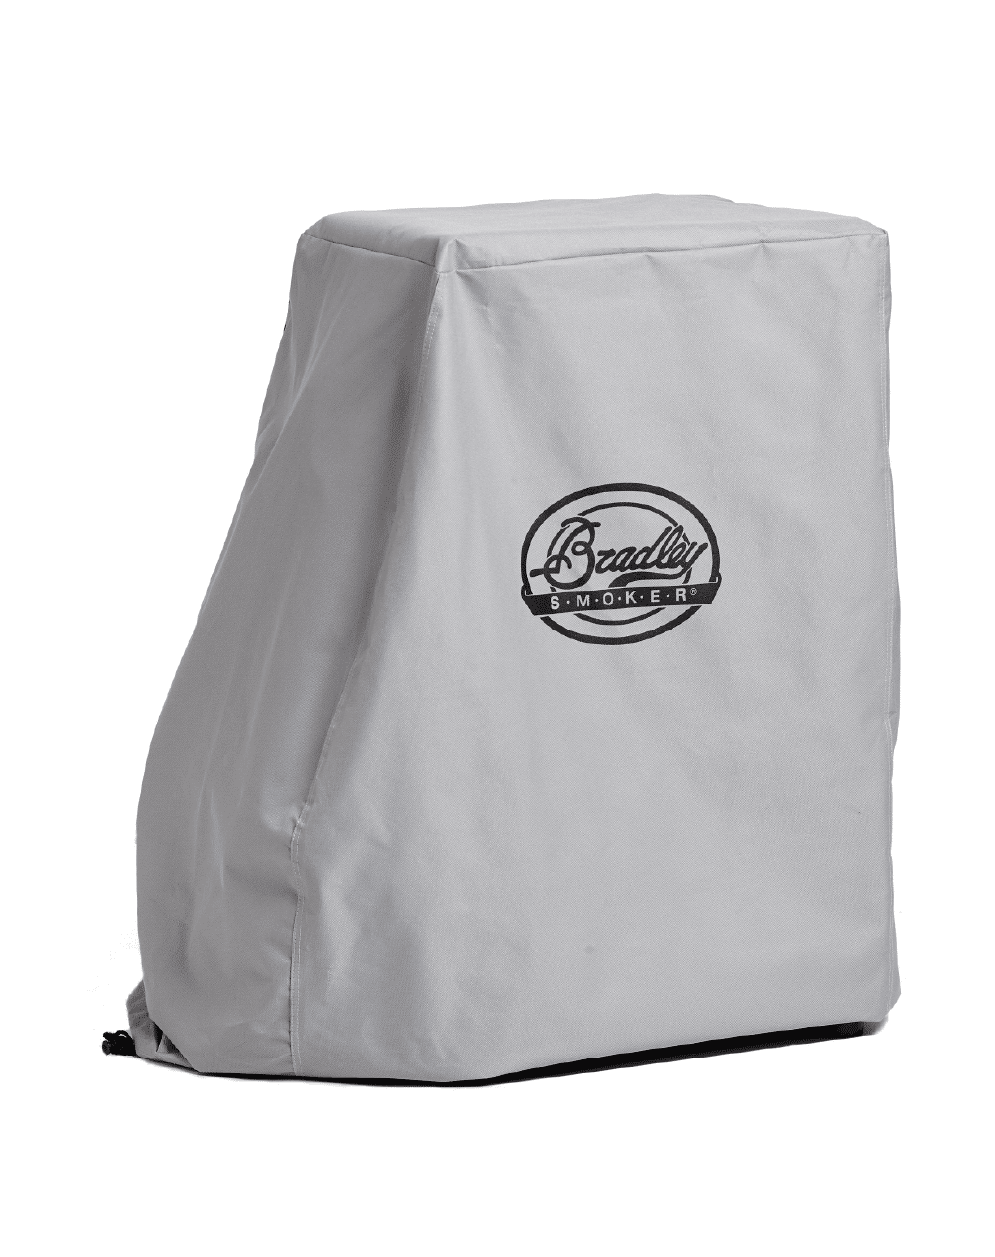 Weather Resistant Smoker Cover, Grey